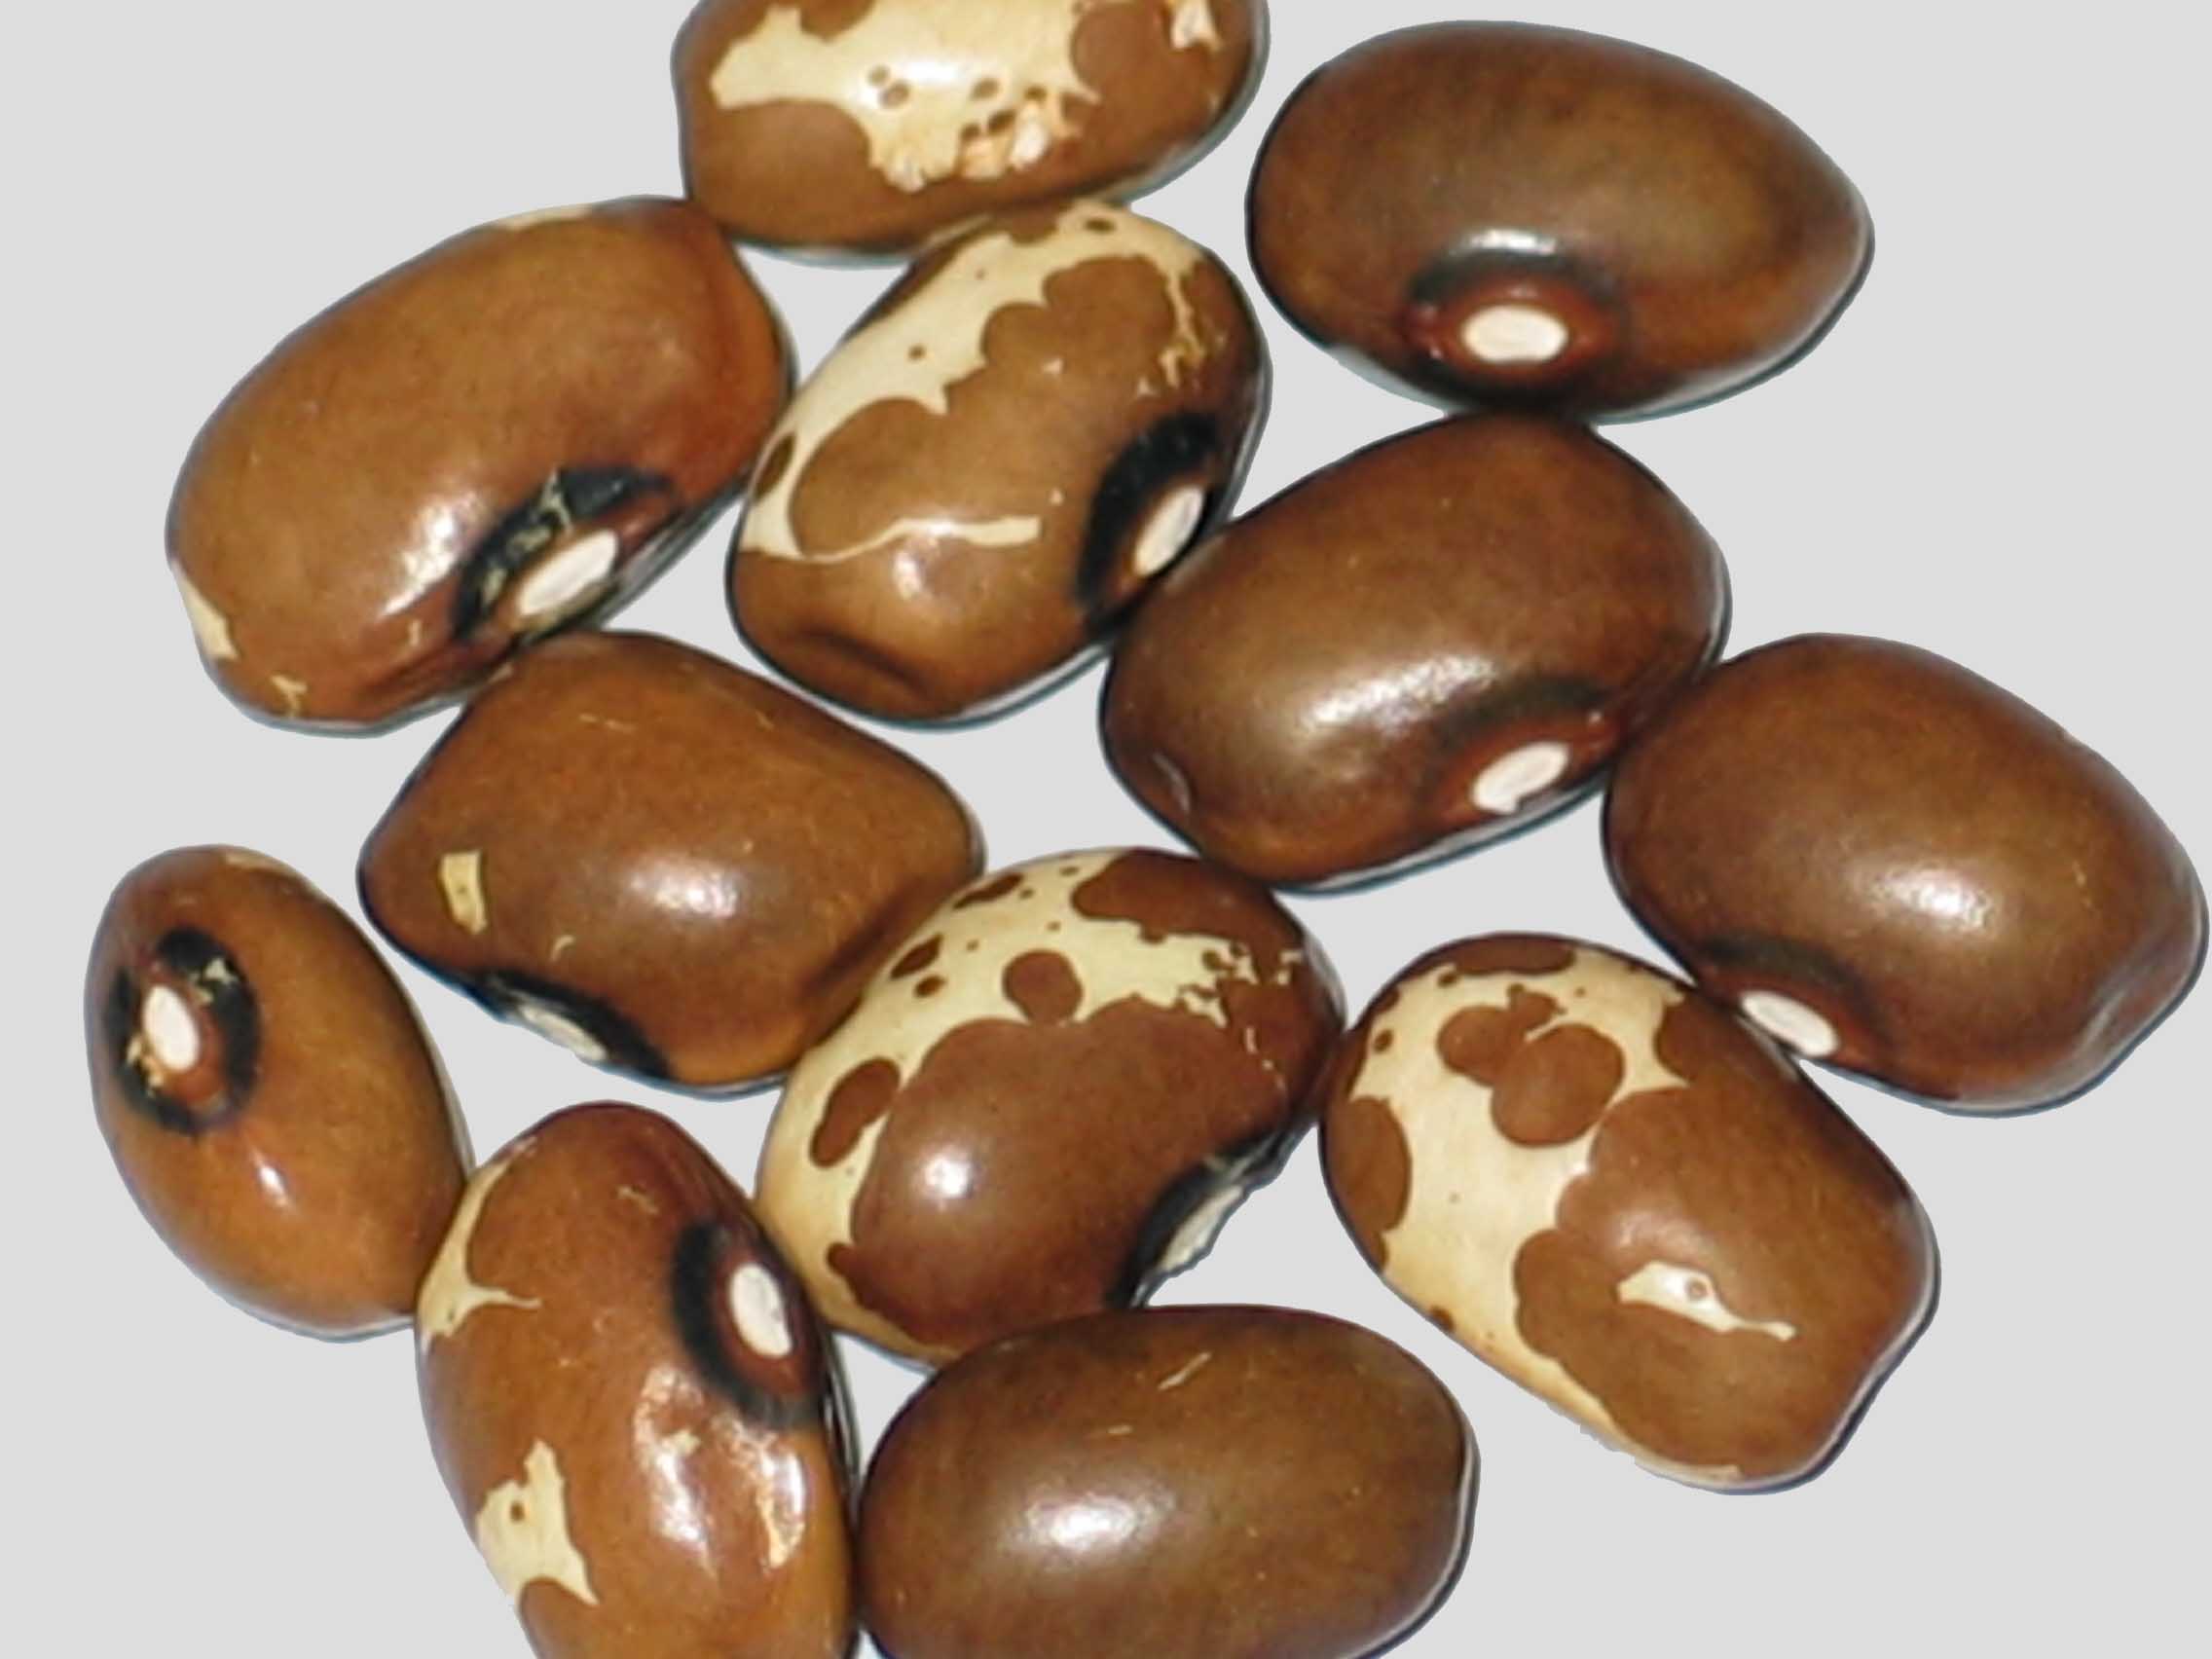 image of Sarconi 2 beans